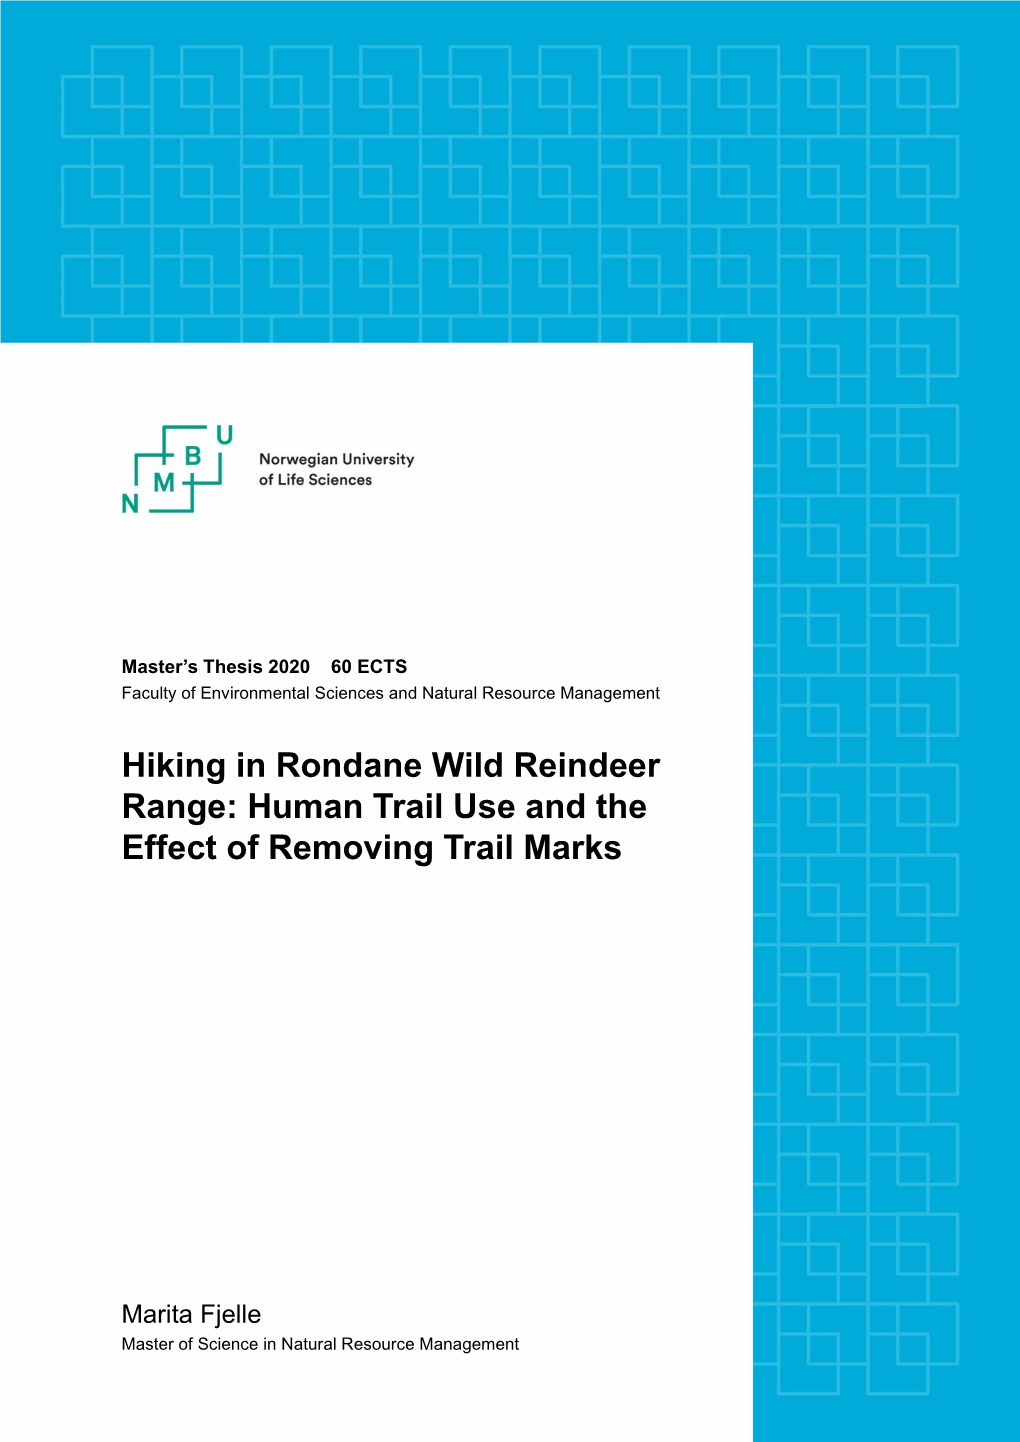 Hiking in Rondane Wild Reindeer Range: Human Trail Use and the Effect of Removing Trail Marks